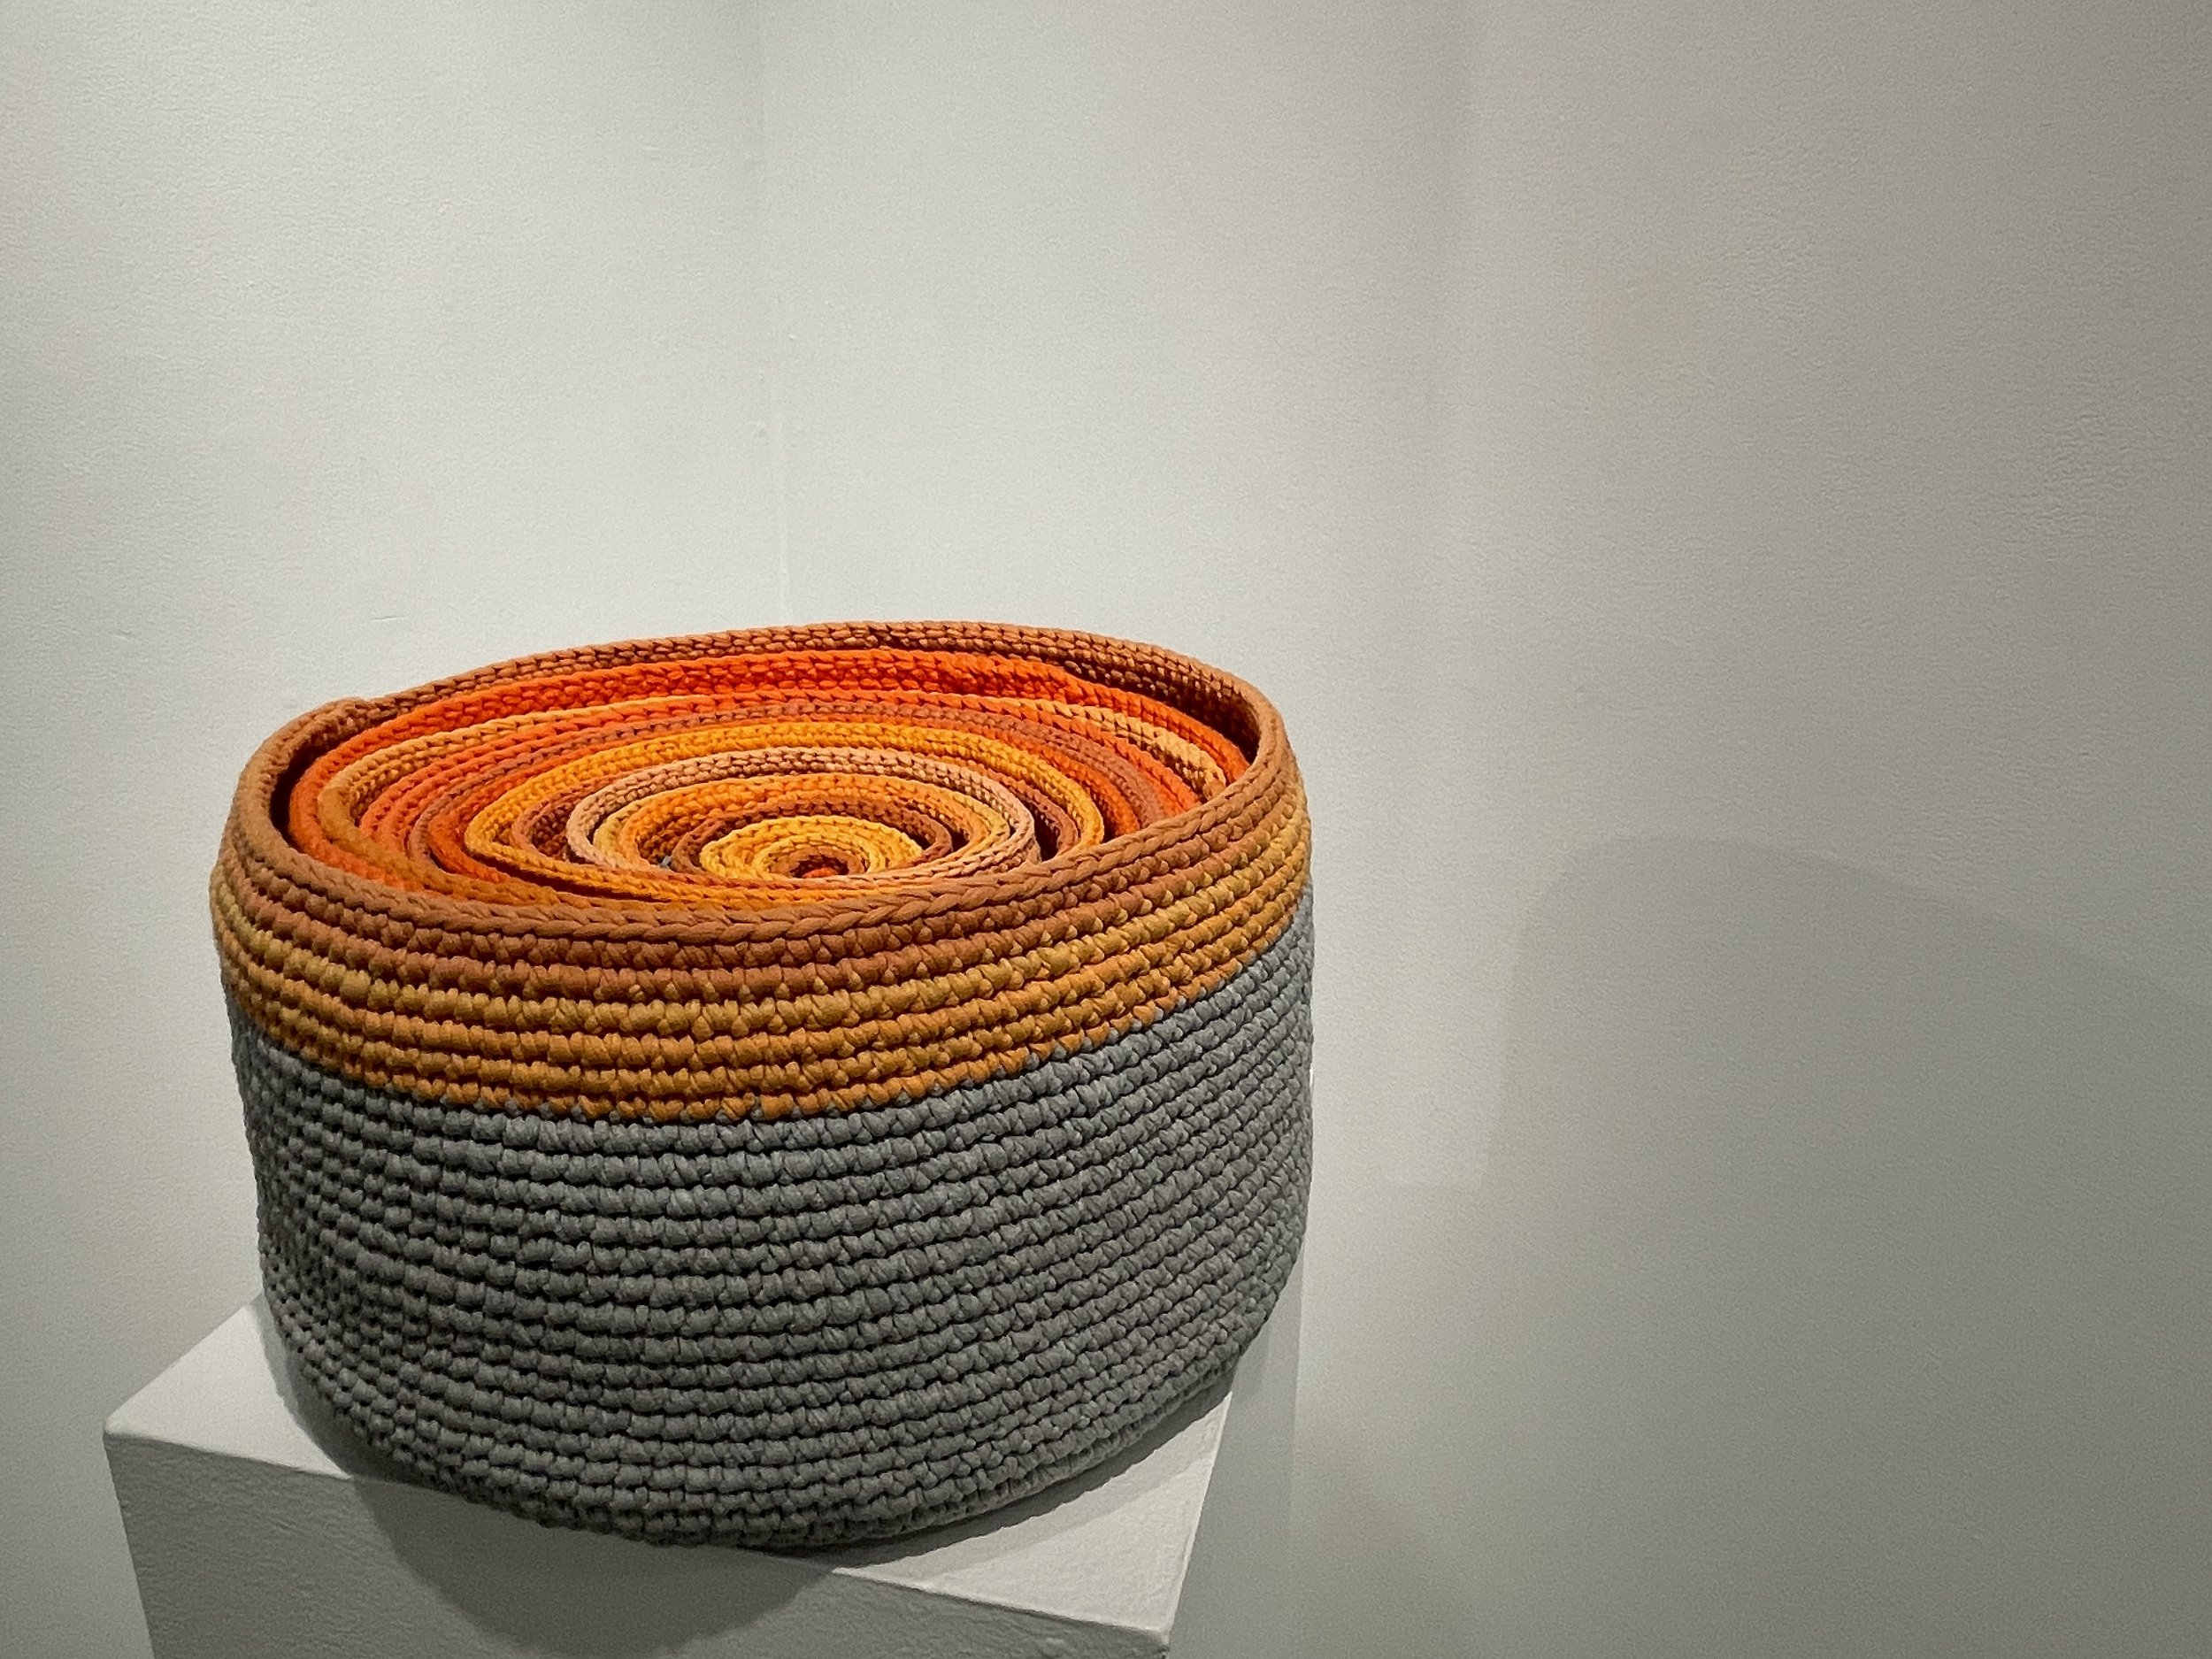  Michele Fandel Bonner, MA&nbsp;   Empty Nesting Baskets   Crocheted recycled t-shirts  $3,900.00  2015  &nbsp;  Eighteen Nesting Baskets is made from recycled T-shirts sourced from local thrift shops supporting the homeless. The work was well underw